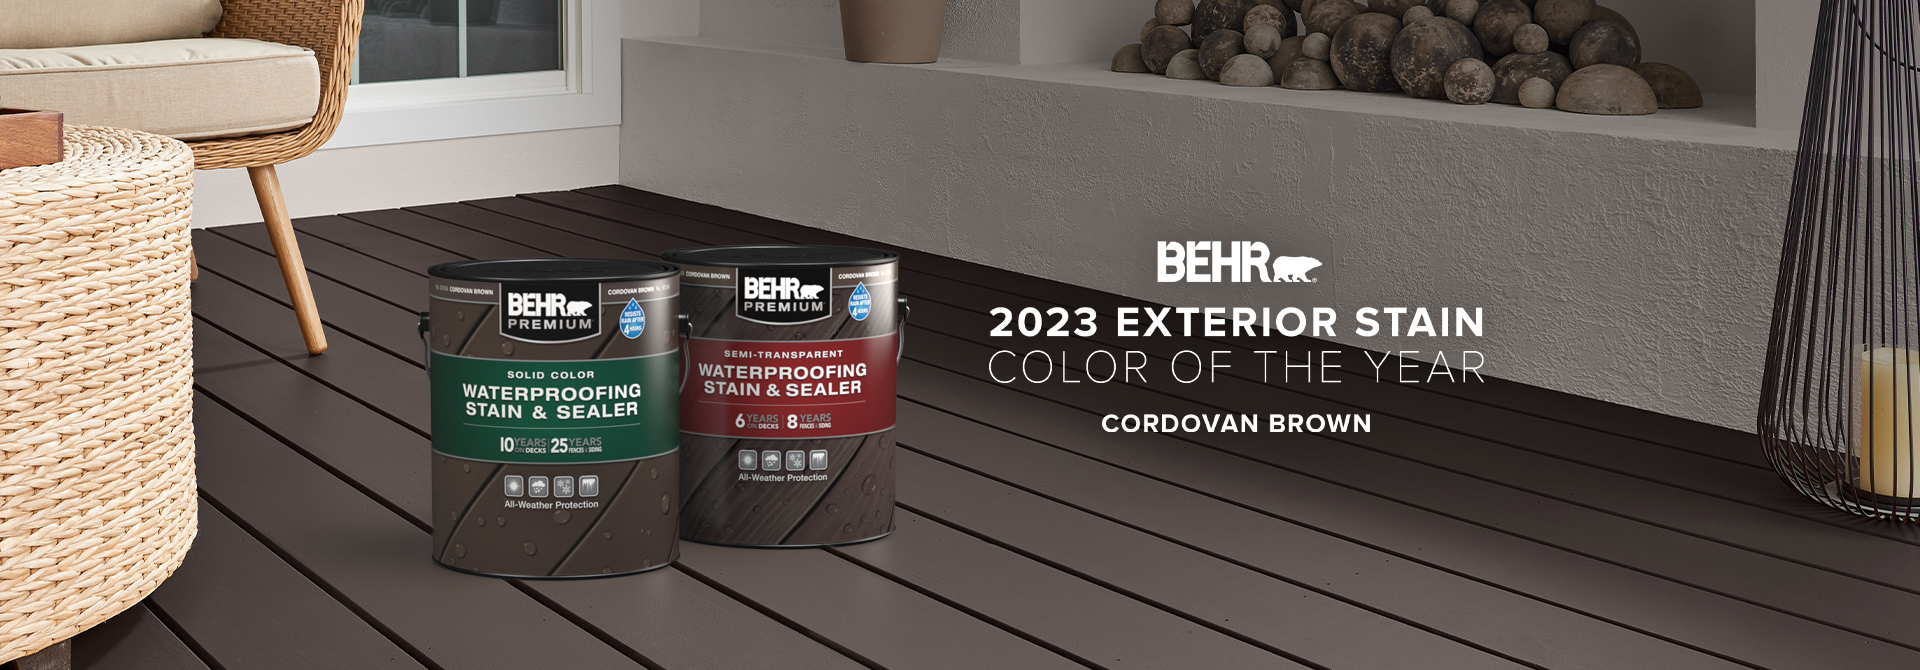 Wooden deck stained in Cordovan Brown, featuring Behr 2023 Color of the Year, Cordovan Brown